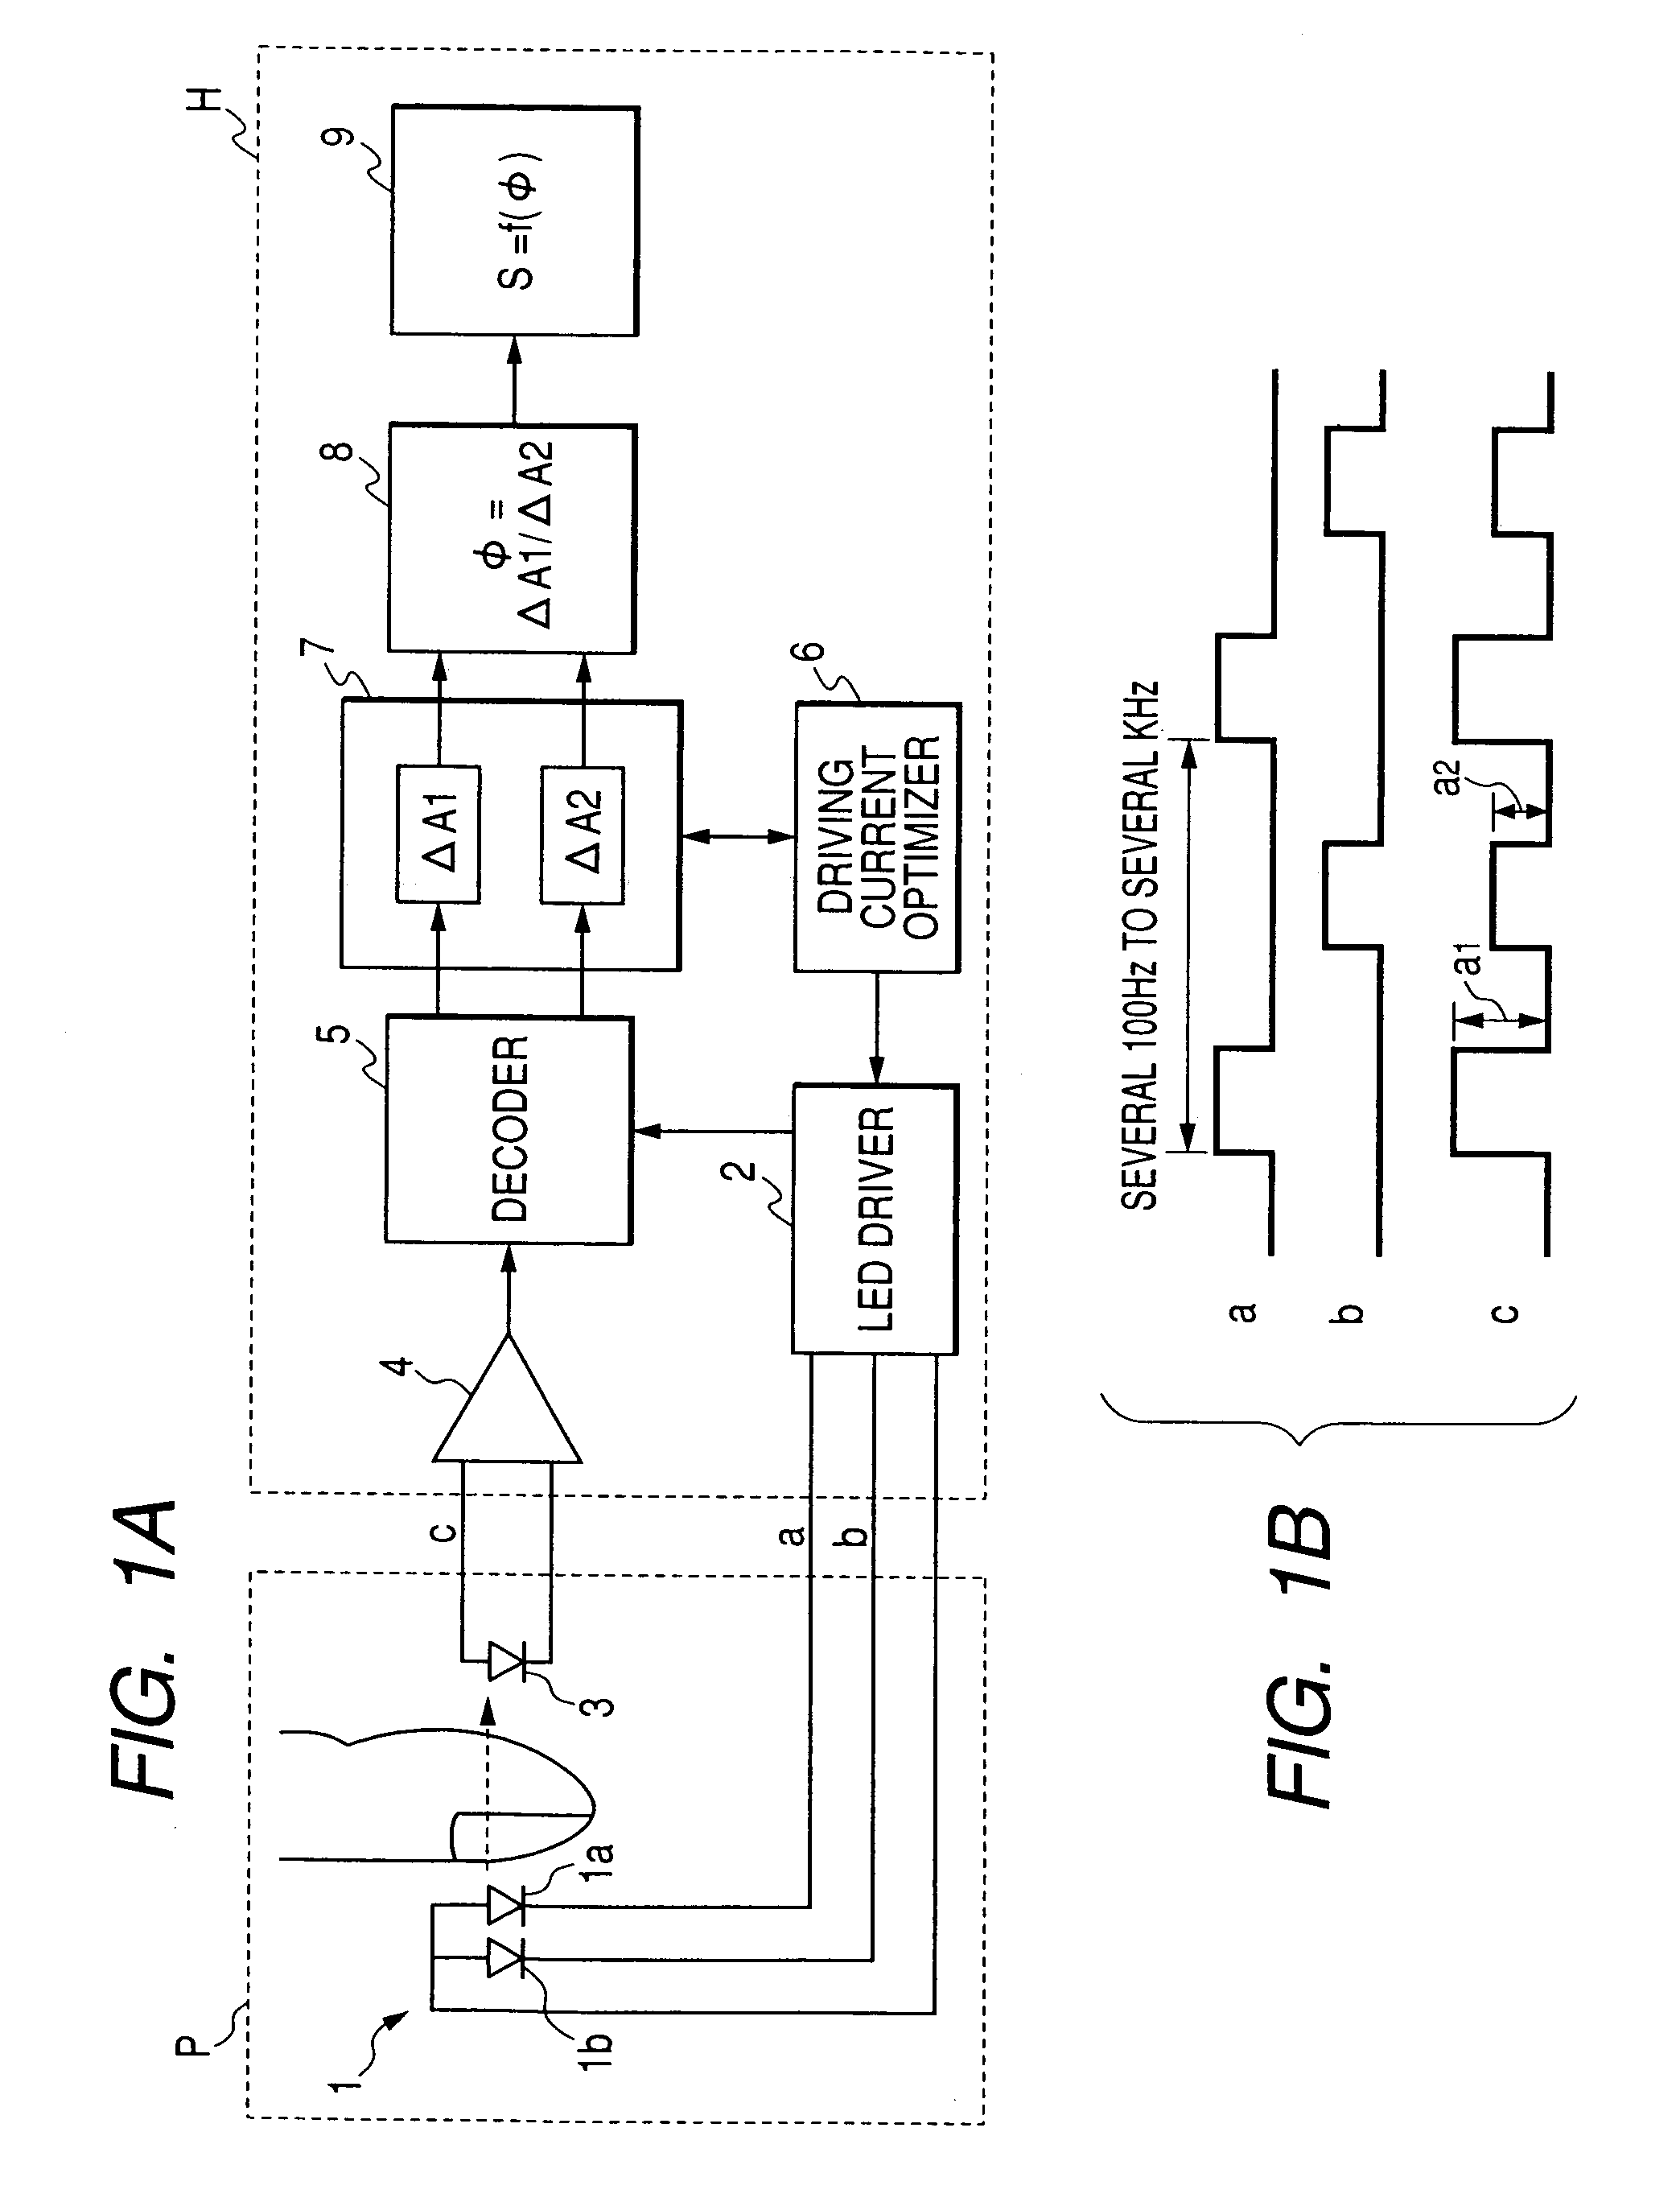 Apparatus for determining concentrations of light absorbing substances in blood